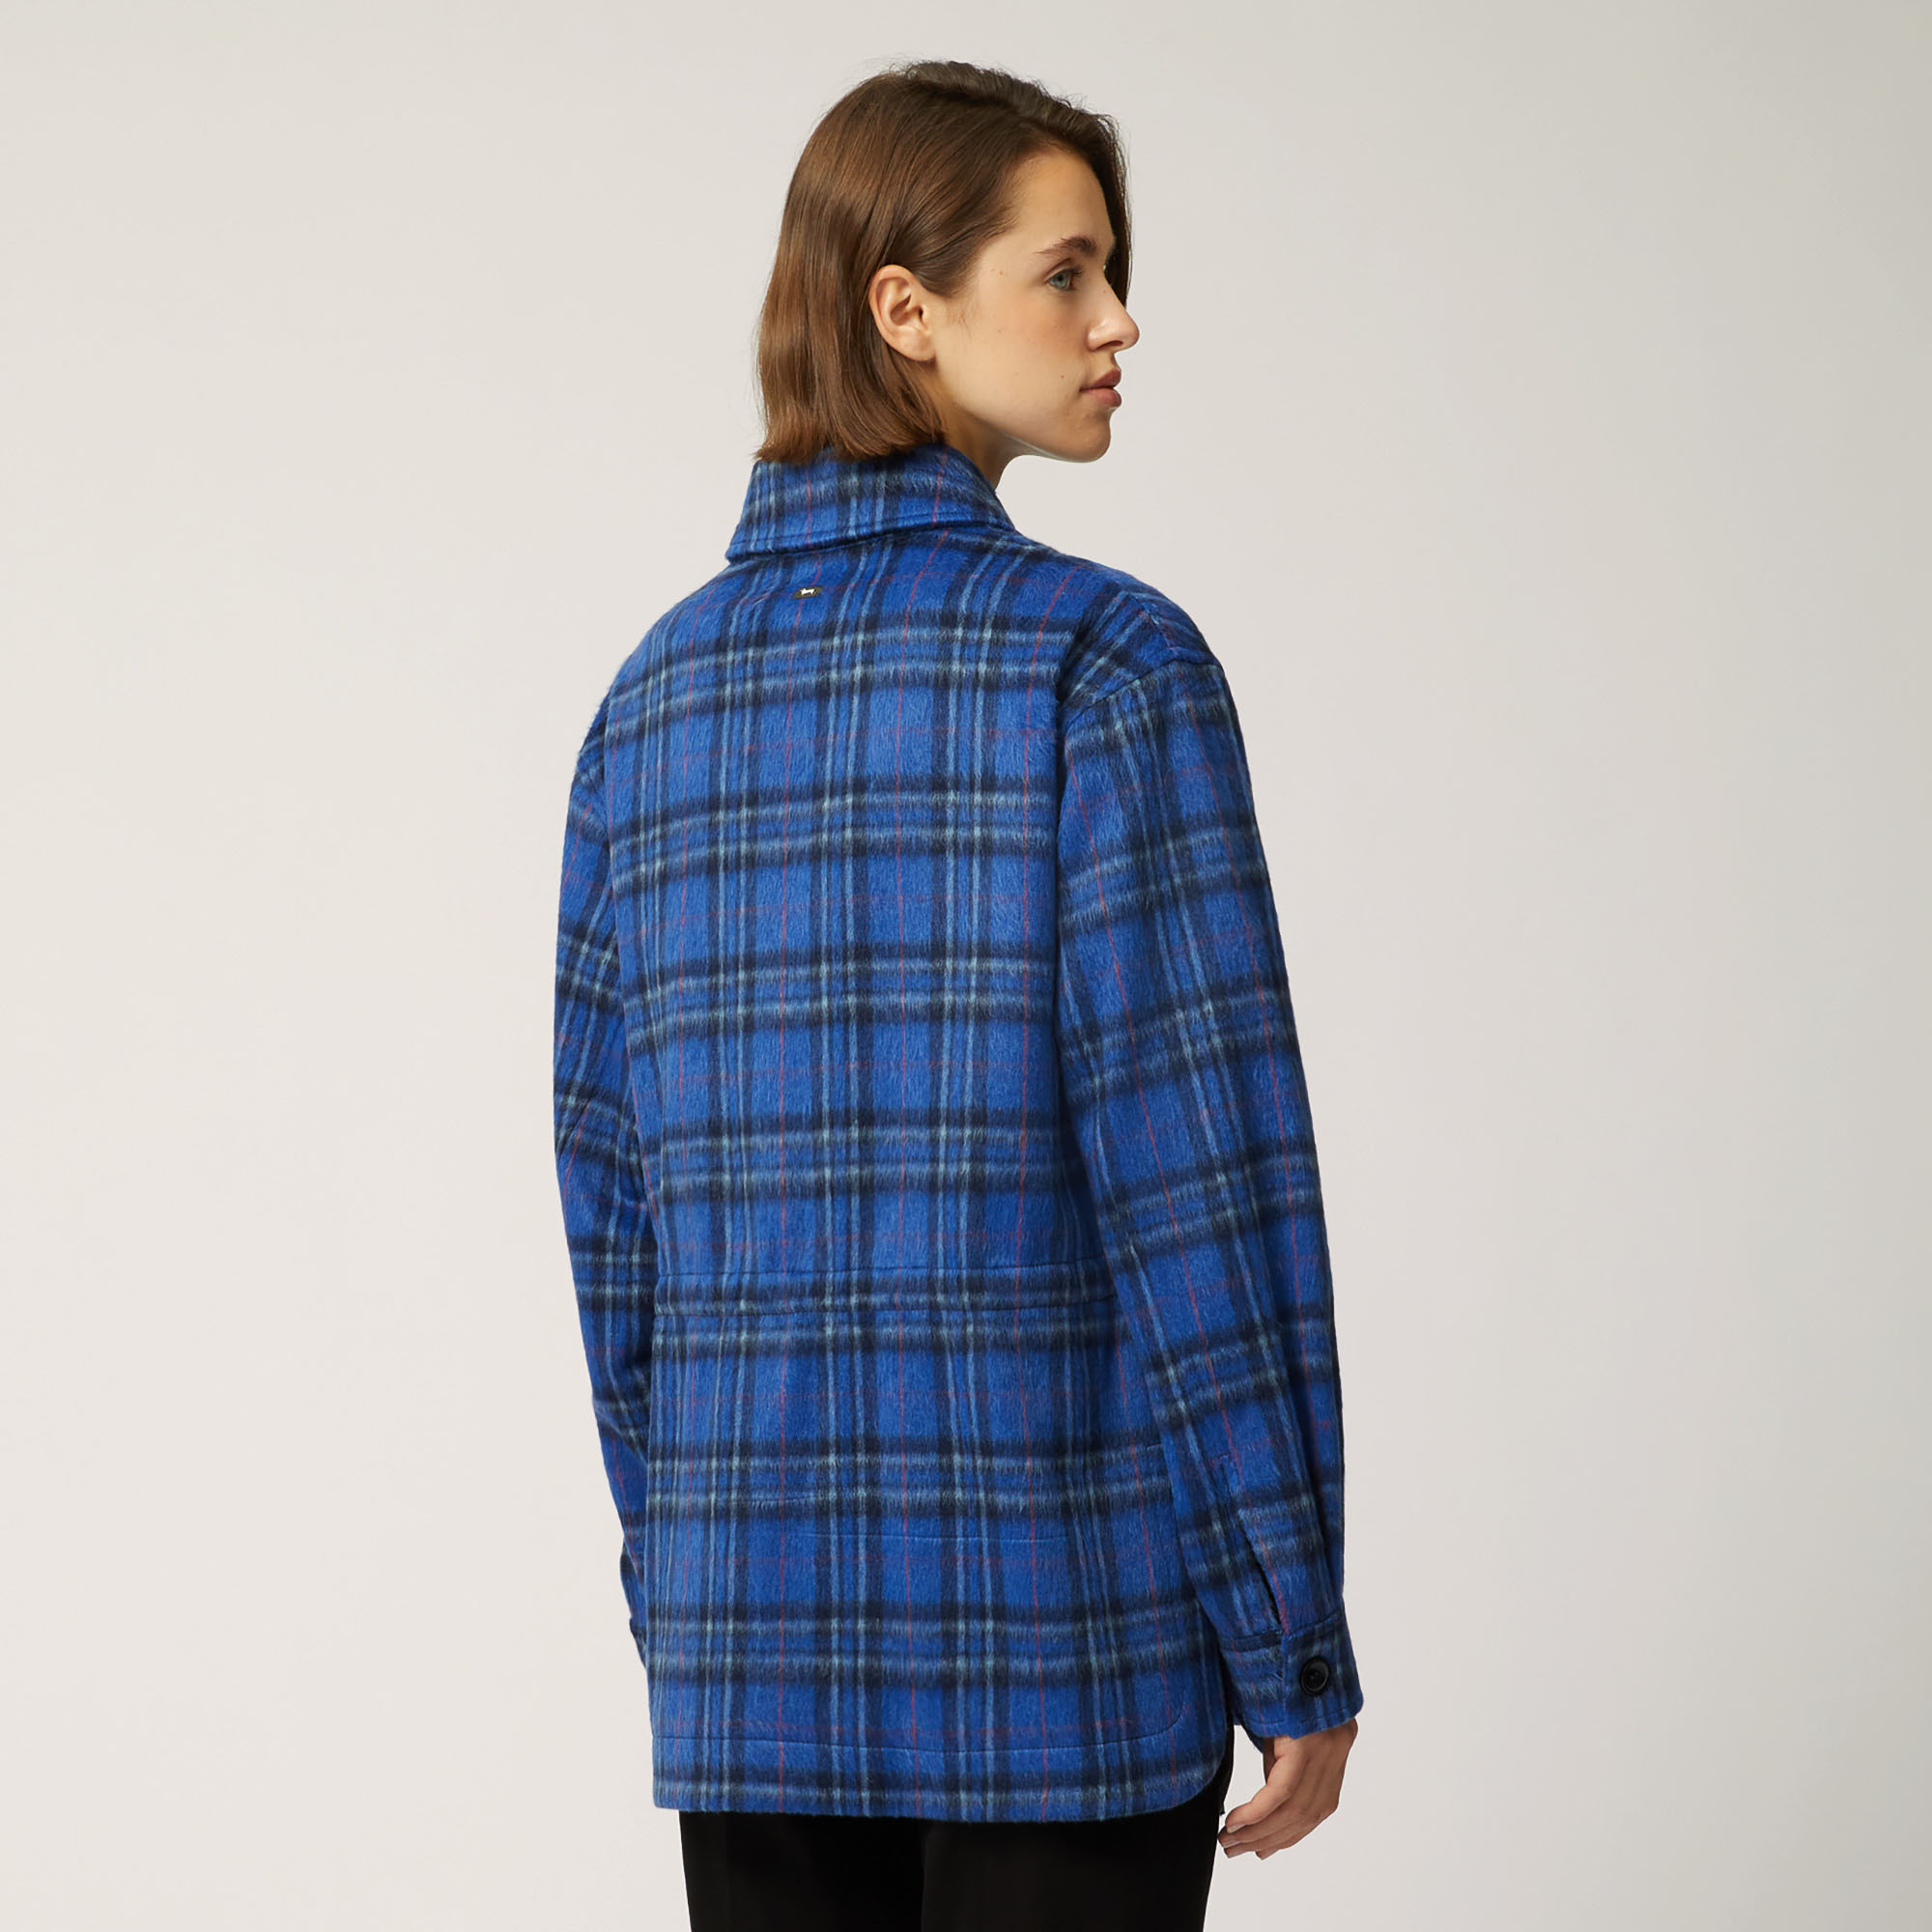 Chequered Jacket With Drawstring Waist, Light Blue, large image number 1